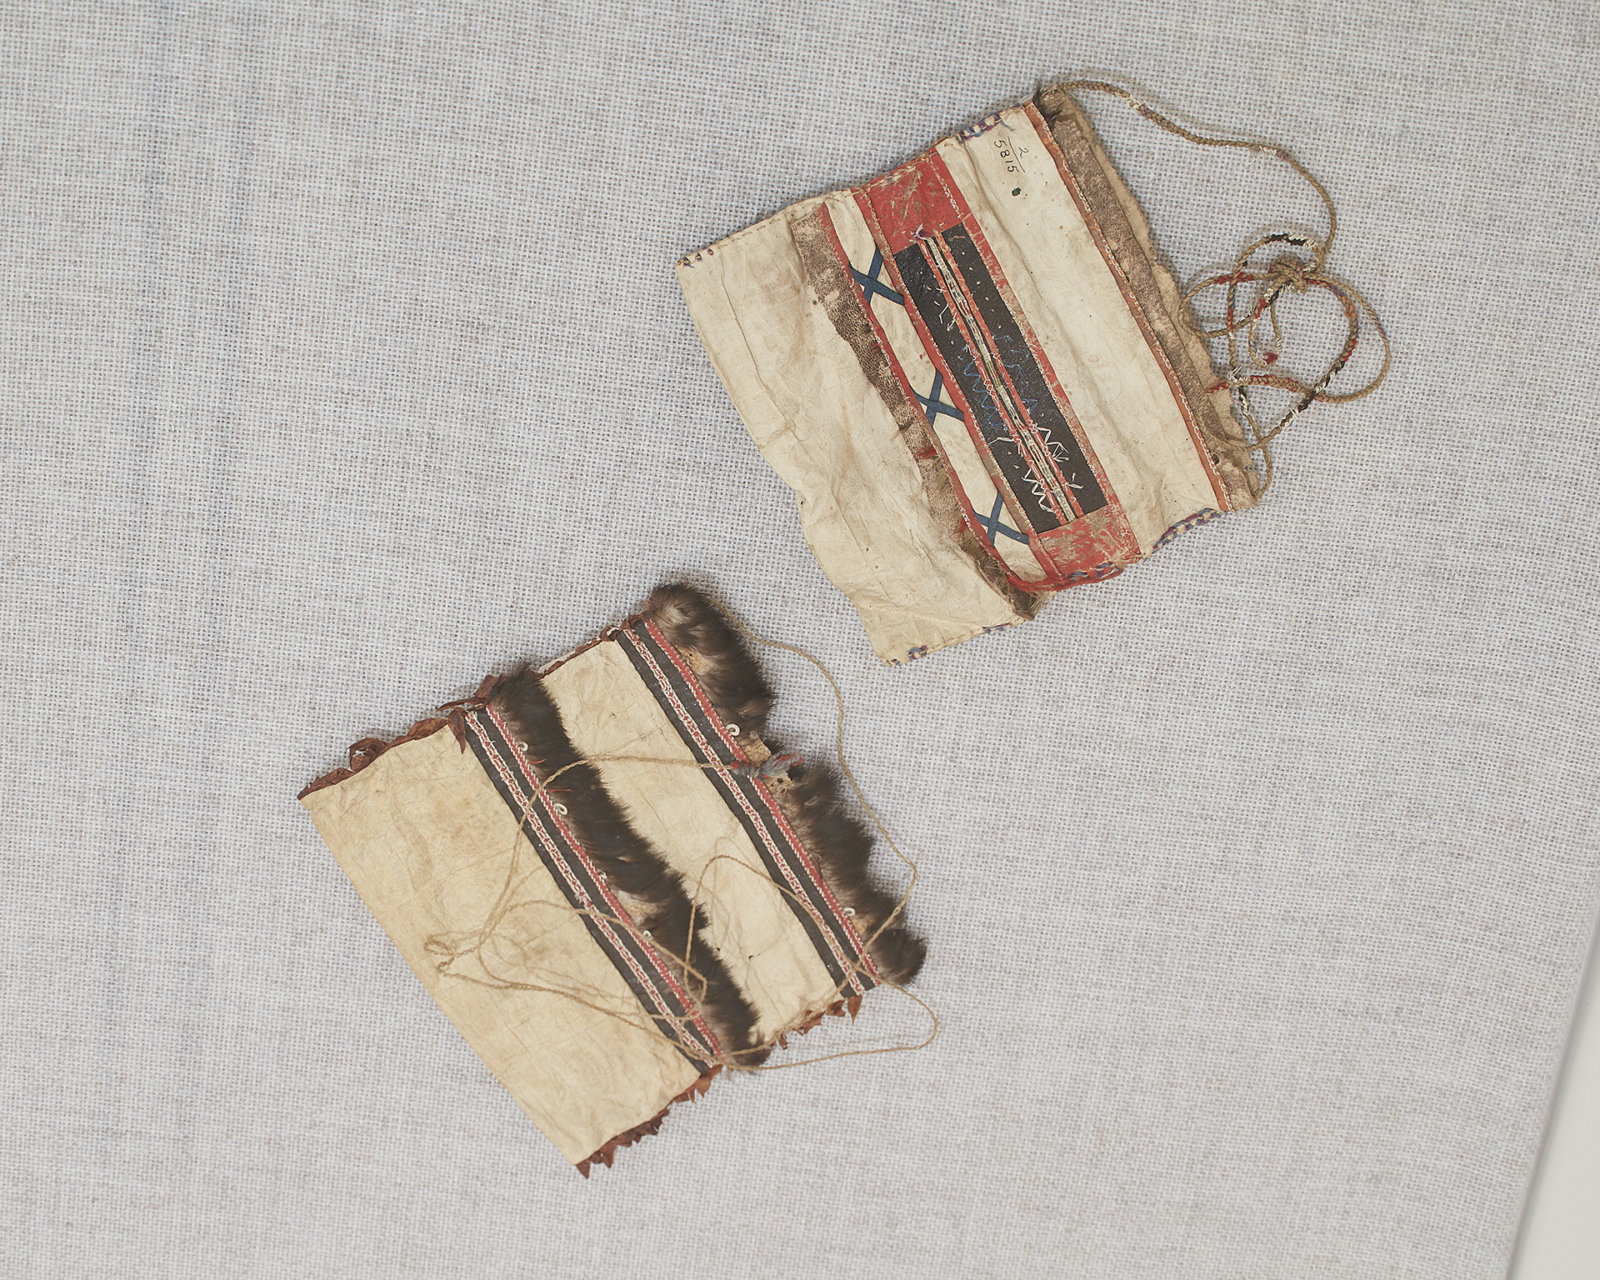 Tanya Lukin Linklater, Flat vessels made by the hands of our grandmothers that we discern and decipher as potential messages of repair (detail), 2019, Alutiiq sewing bags accessioned by the Phoebe A. Hearst Museum of Anthropology, University of California, Berkeley, in 1904; fur, graphite, gut, wool, cotton, feather, sinew, quill, skin, glass; dimensions variable. Installation view, SOFT POWER, SF MOMA, San Francisco, USA, 2019